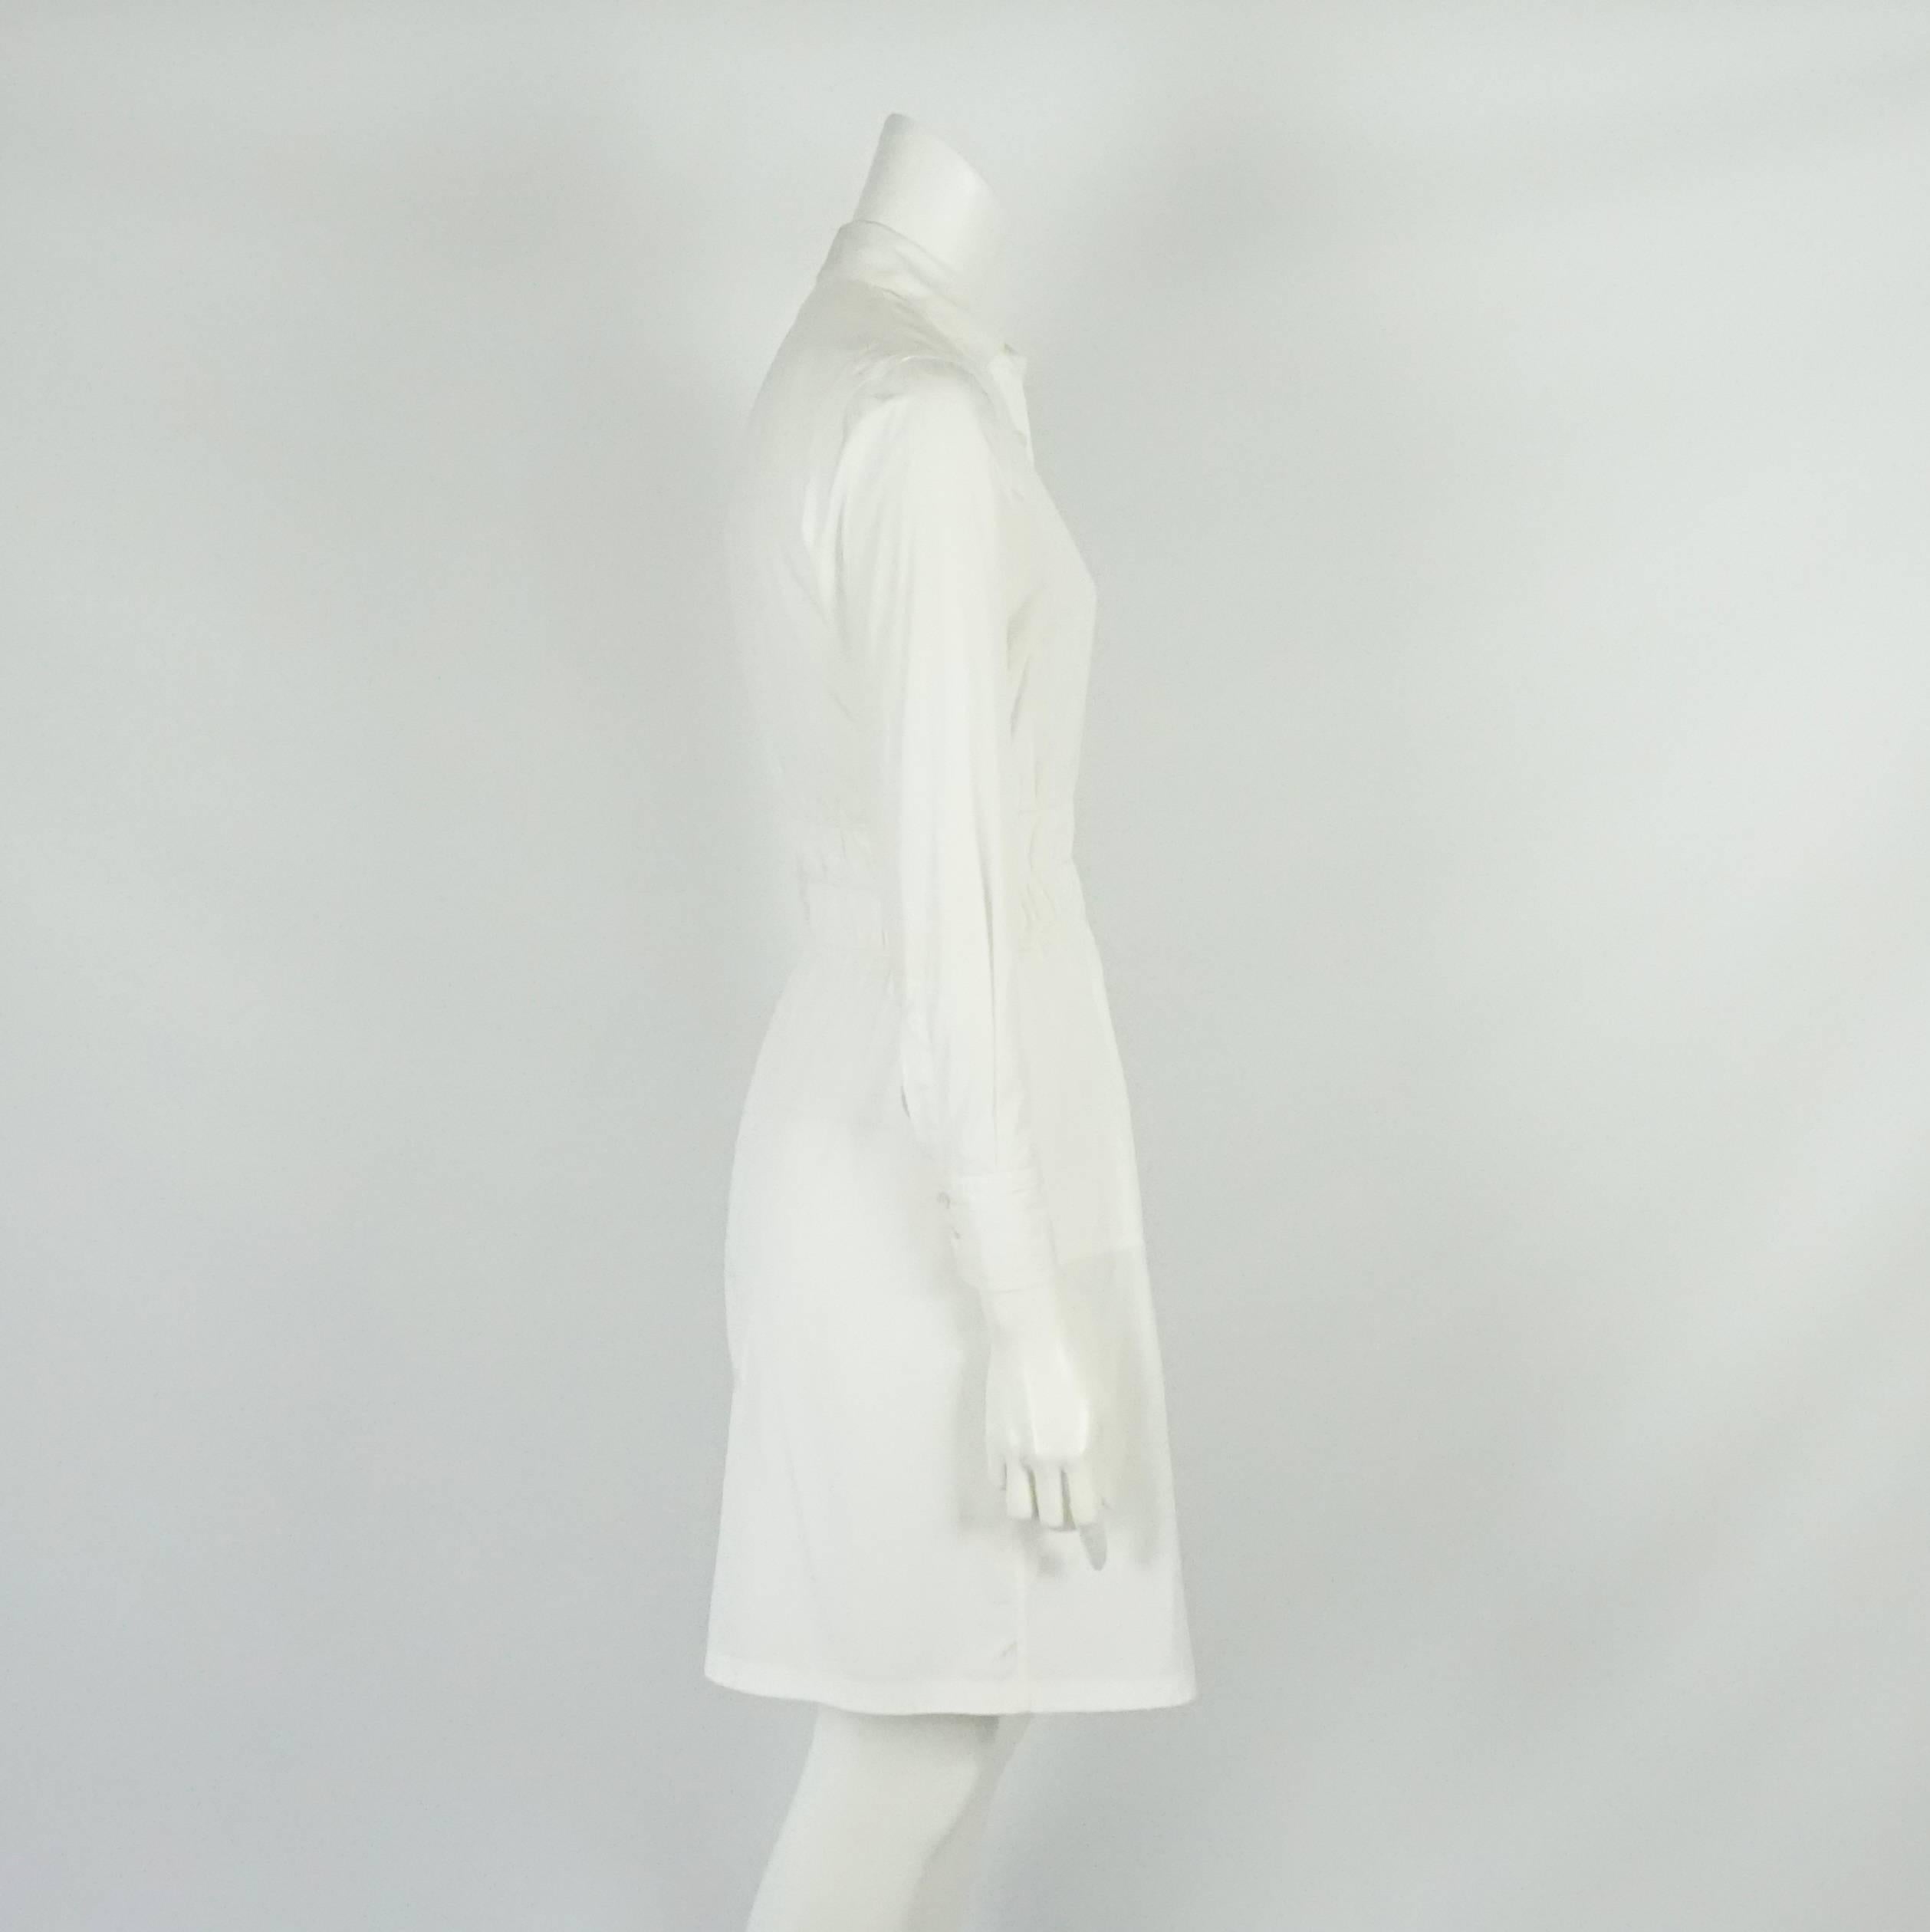 Bottega Veneta White Cotton Long Sleeve Dress with Cinched Waist - 40. This shirt dress is perfect for traveling and warm weather. It is a great staple to add to your wardrobe. It features stitched waist cinching that is expandable and buttons all